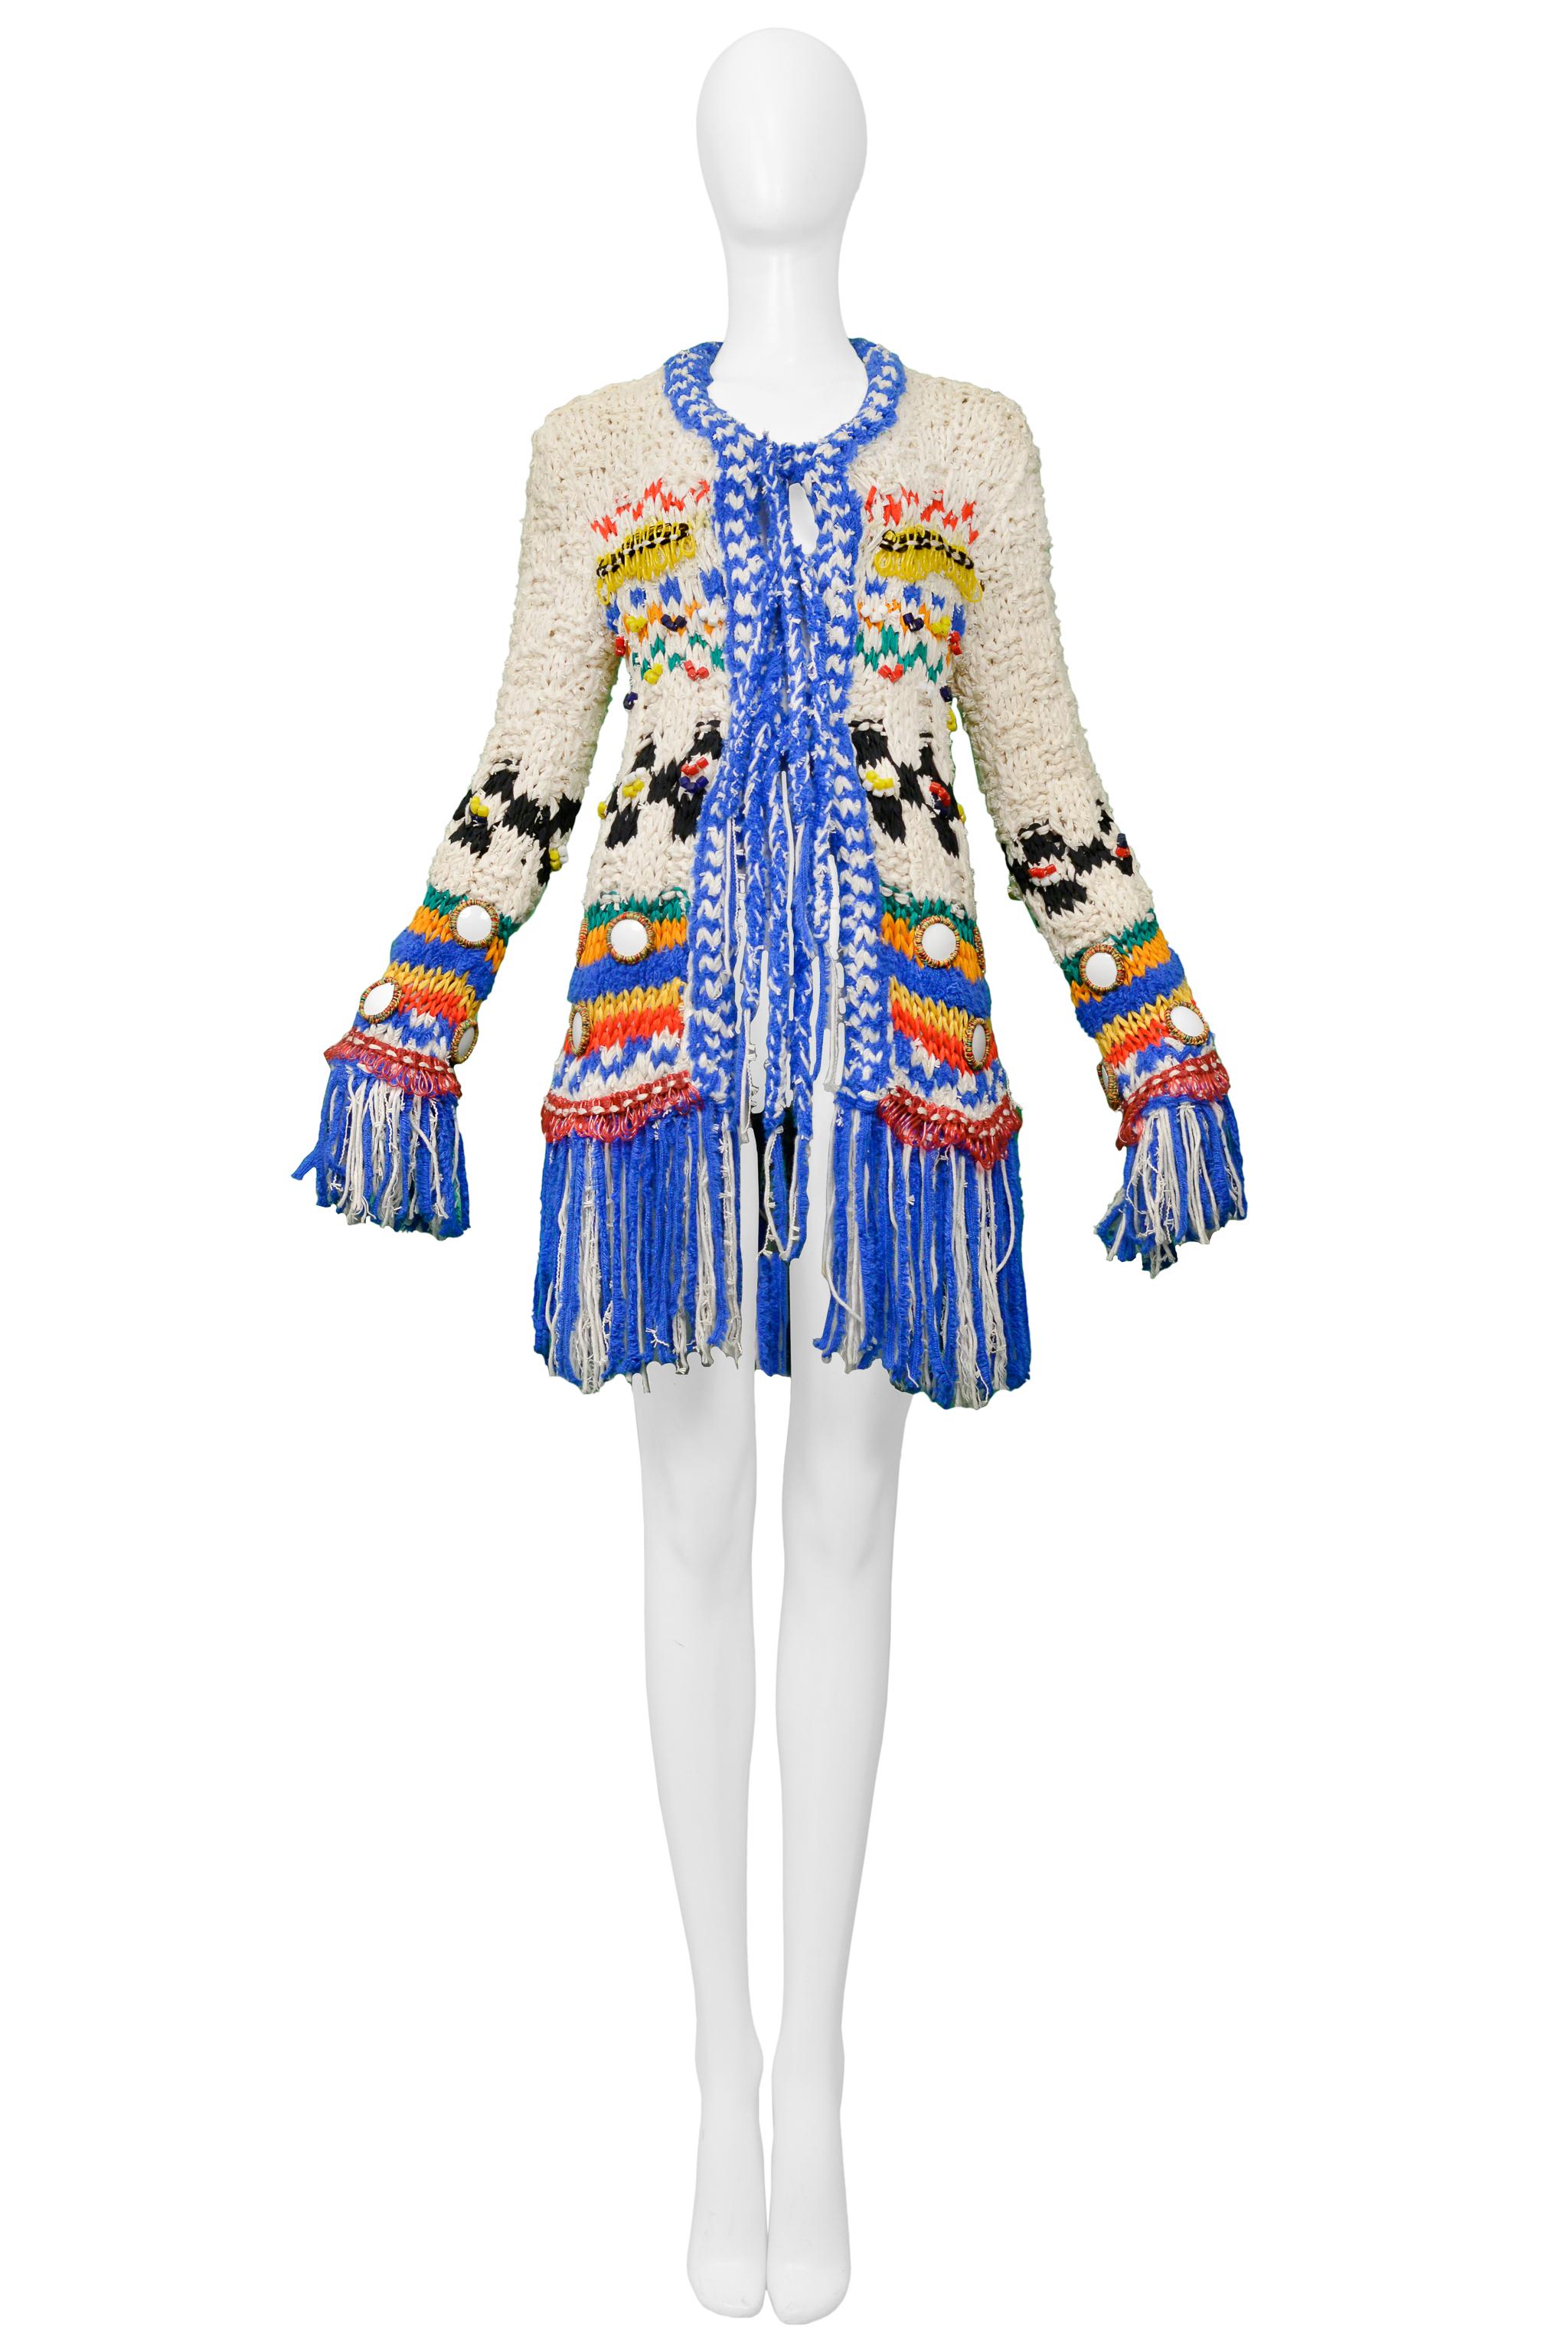 Resurrection Vintage is excited to offer a vintage John Galliano cream check & stripe knit sweater featuring colorful multi fabric woven accents and mirror details throughout, bead and plastic appliqués, tie front closure, and fringe hem and trim.